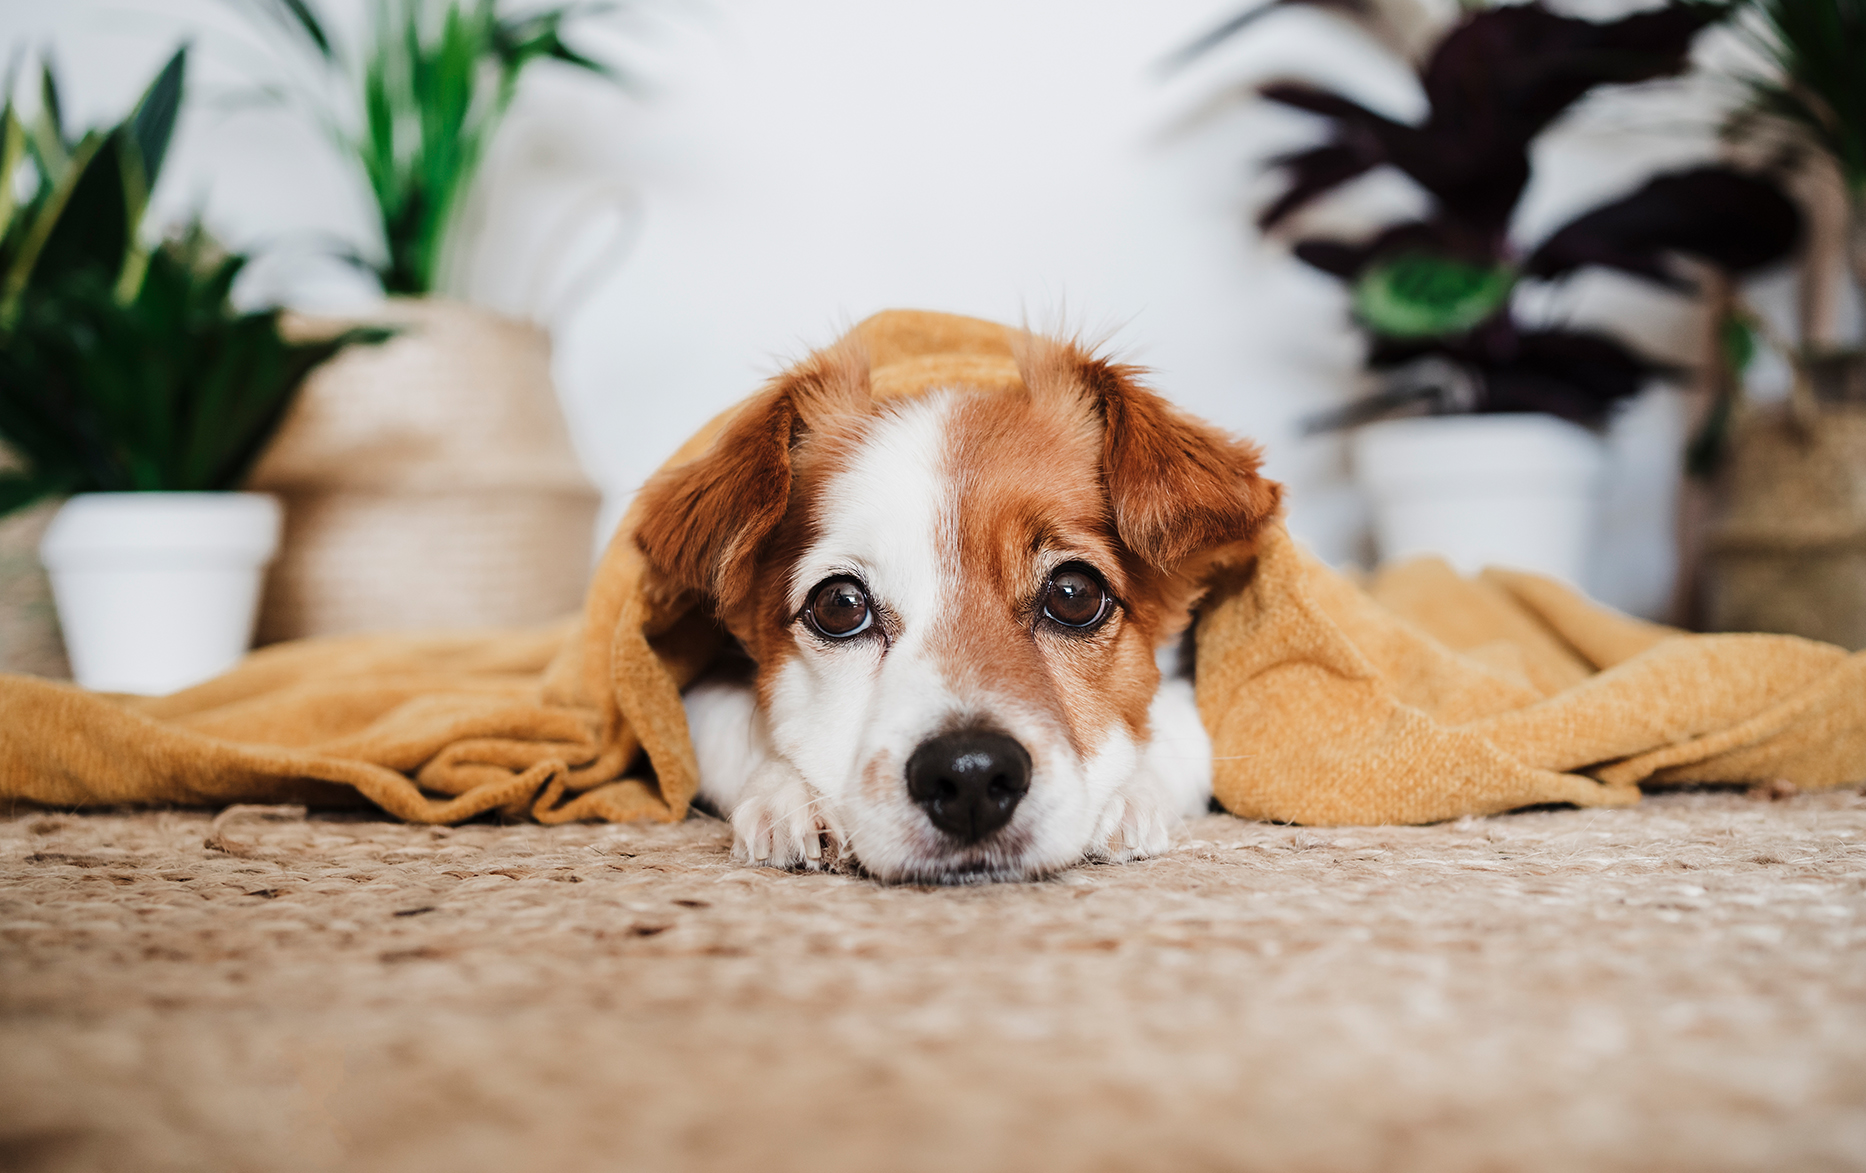 How to Clean Dog Vomit from Carpet